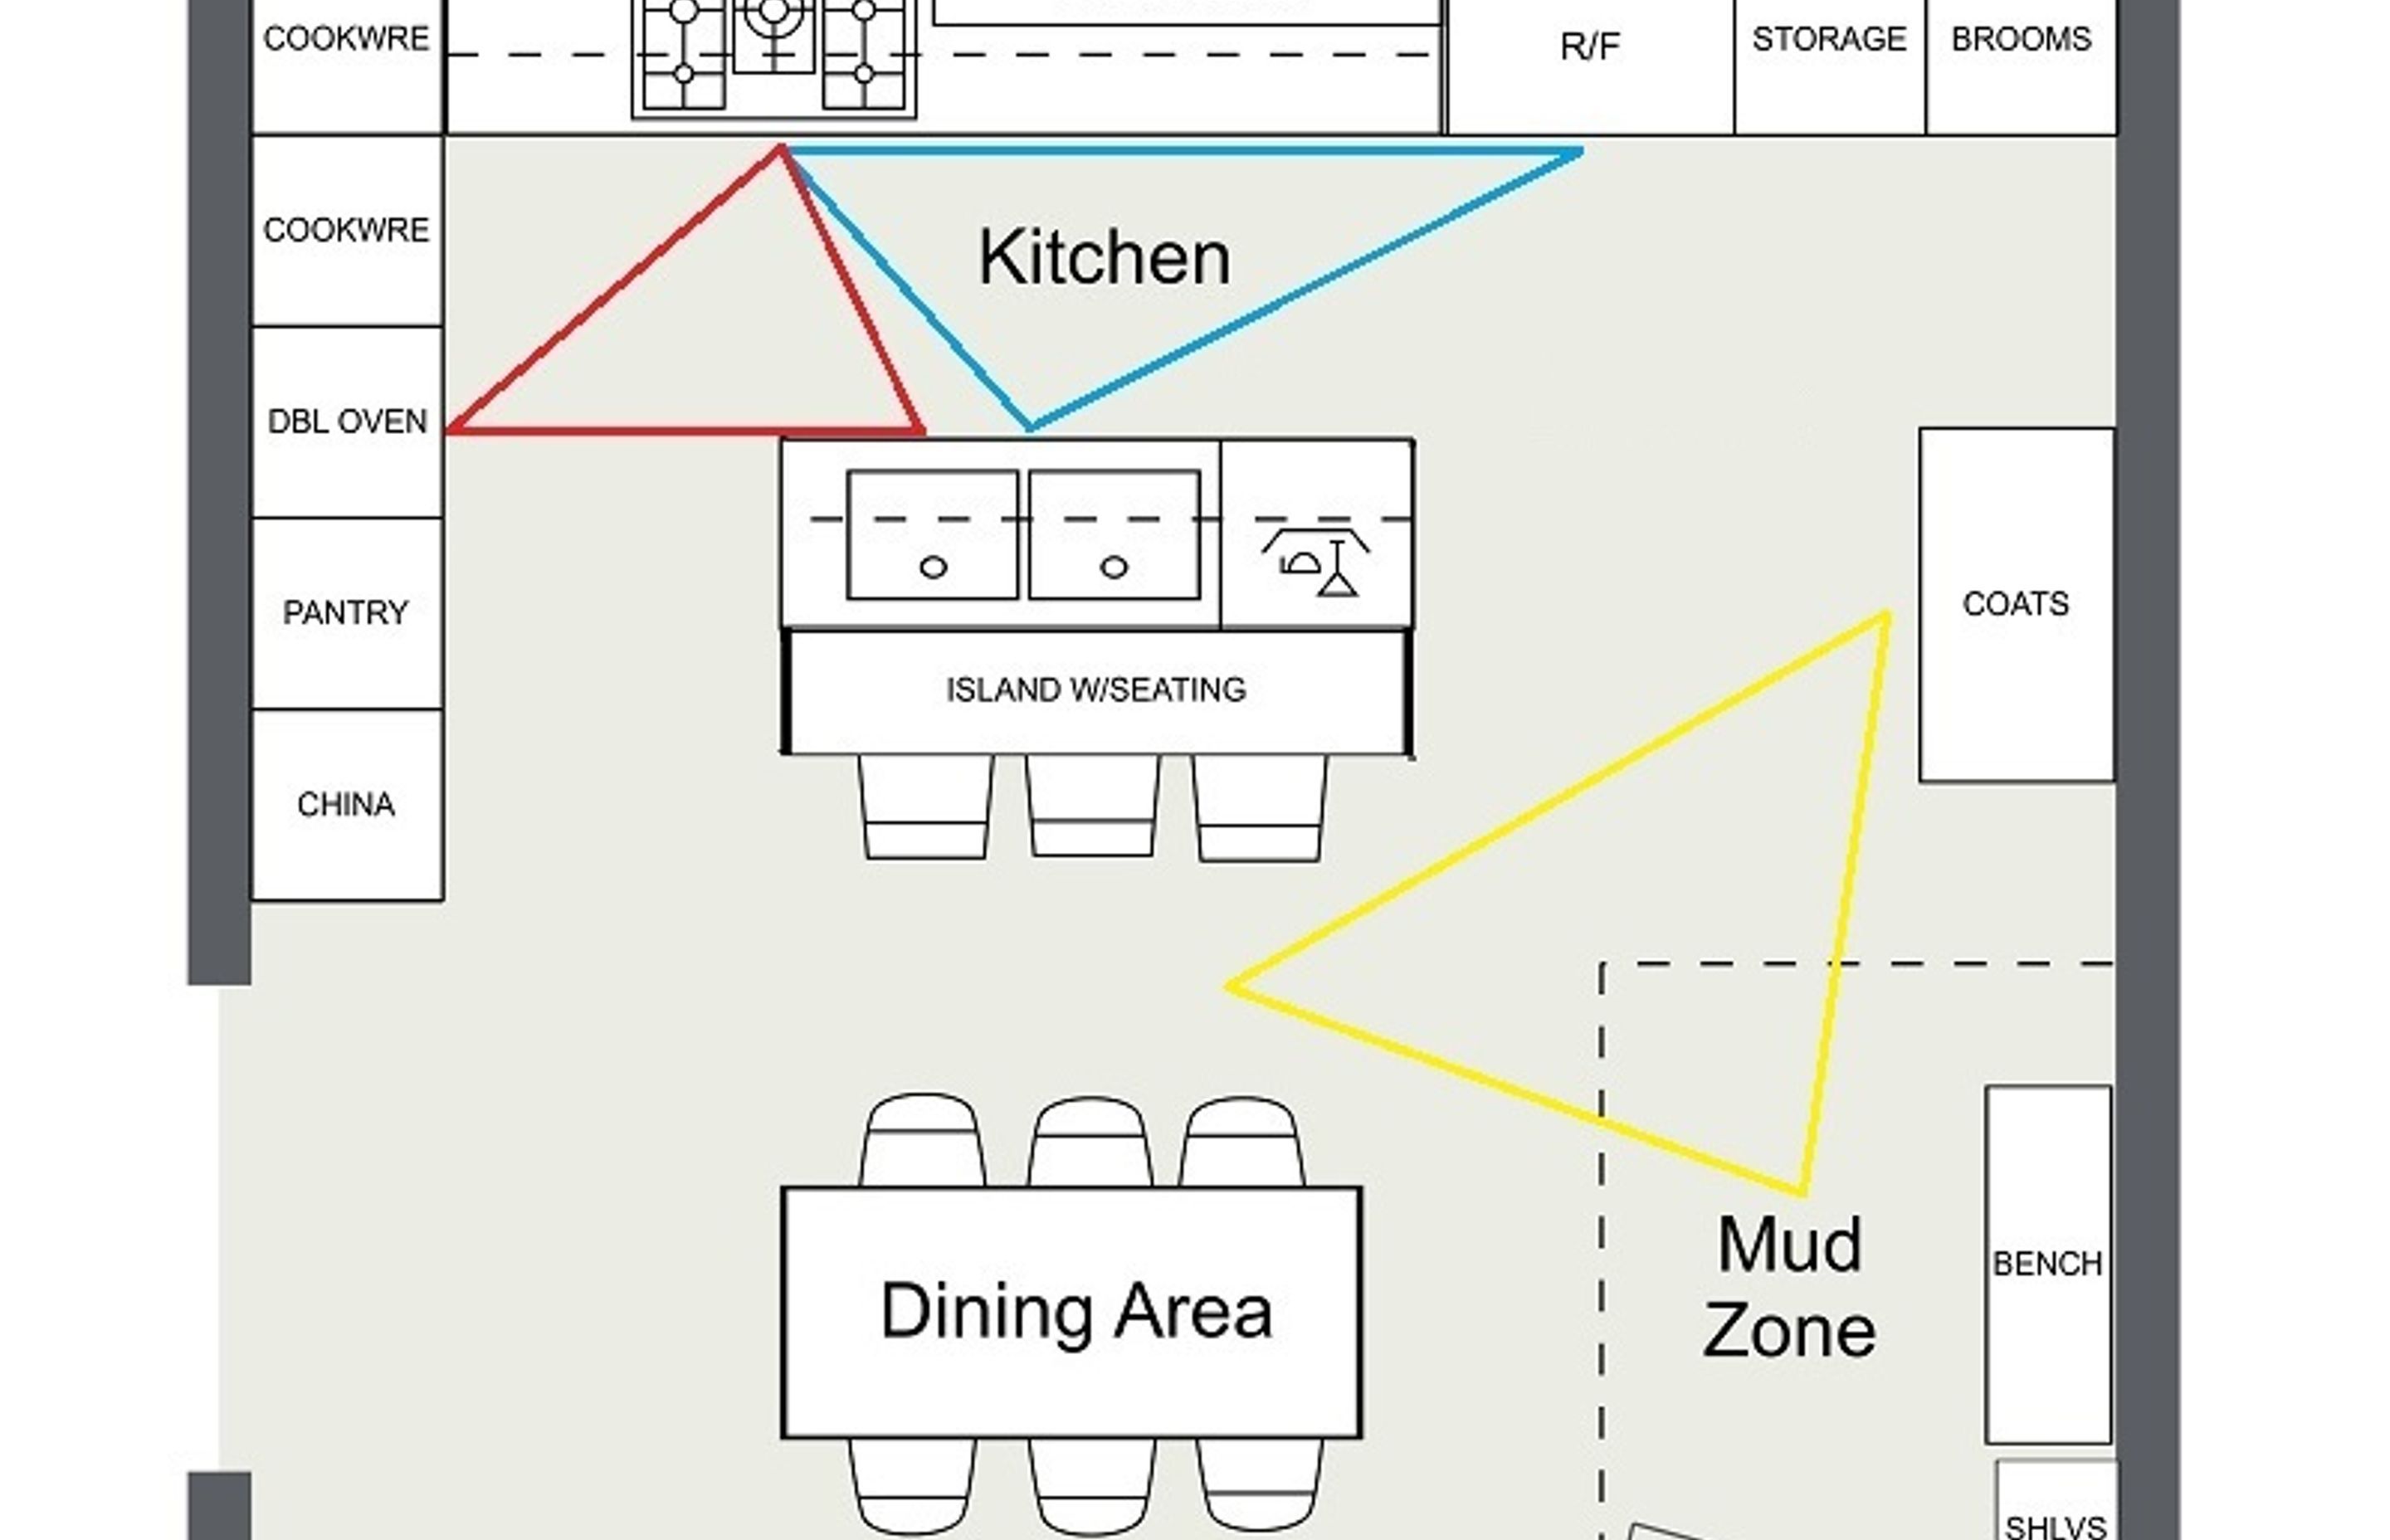 Create Clear zones for circulation, meal preparation and cooking in your kitchen layout (Image courtesy Room Sketcher.com: https://www.roomsketcher.com/blog/kitchen-layout-ideas/)